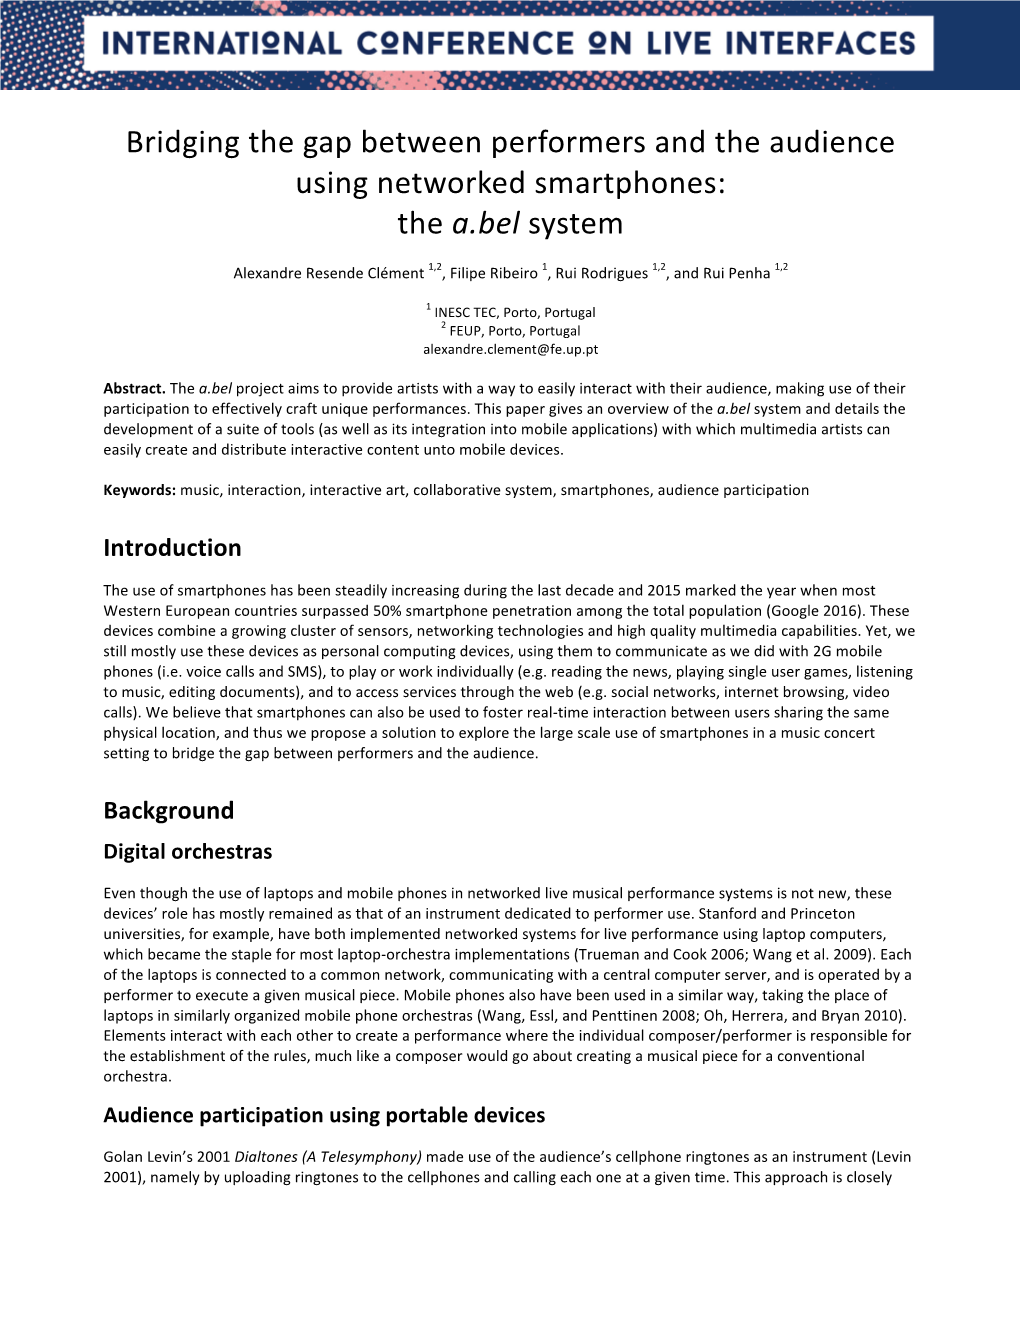 Bridging the Gap Between Performers and the Audience Using Networked Smartphones: the A.Bel System